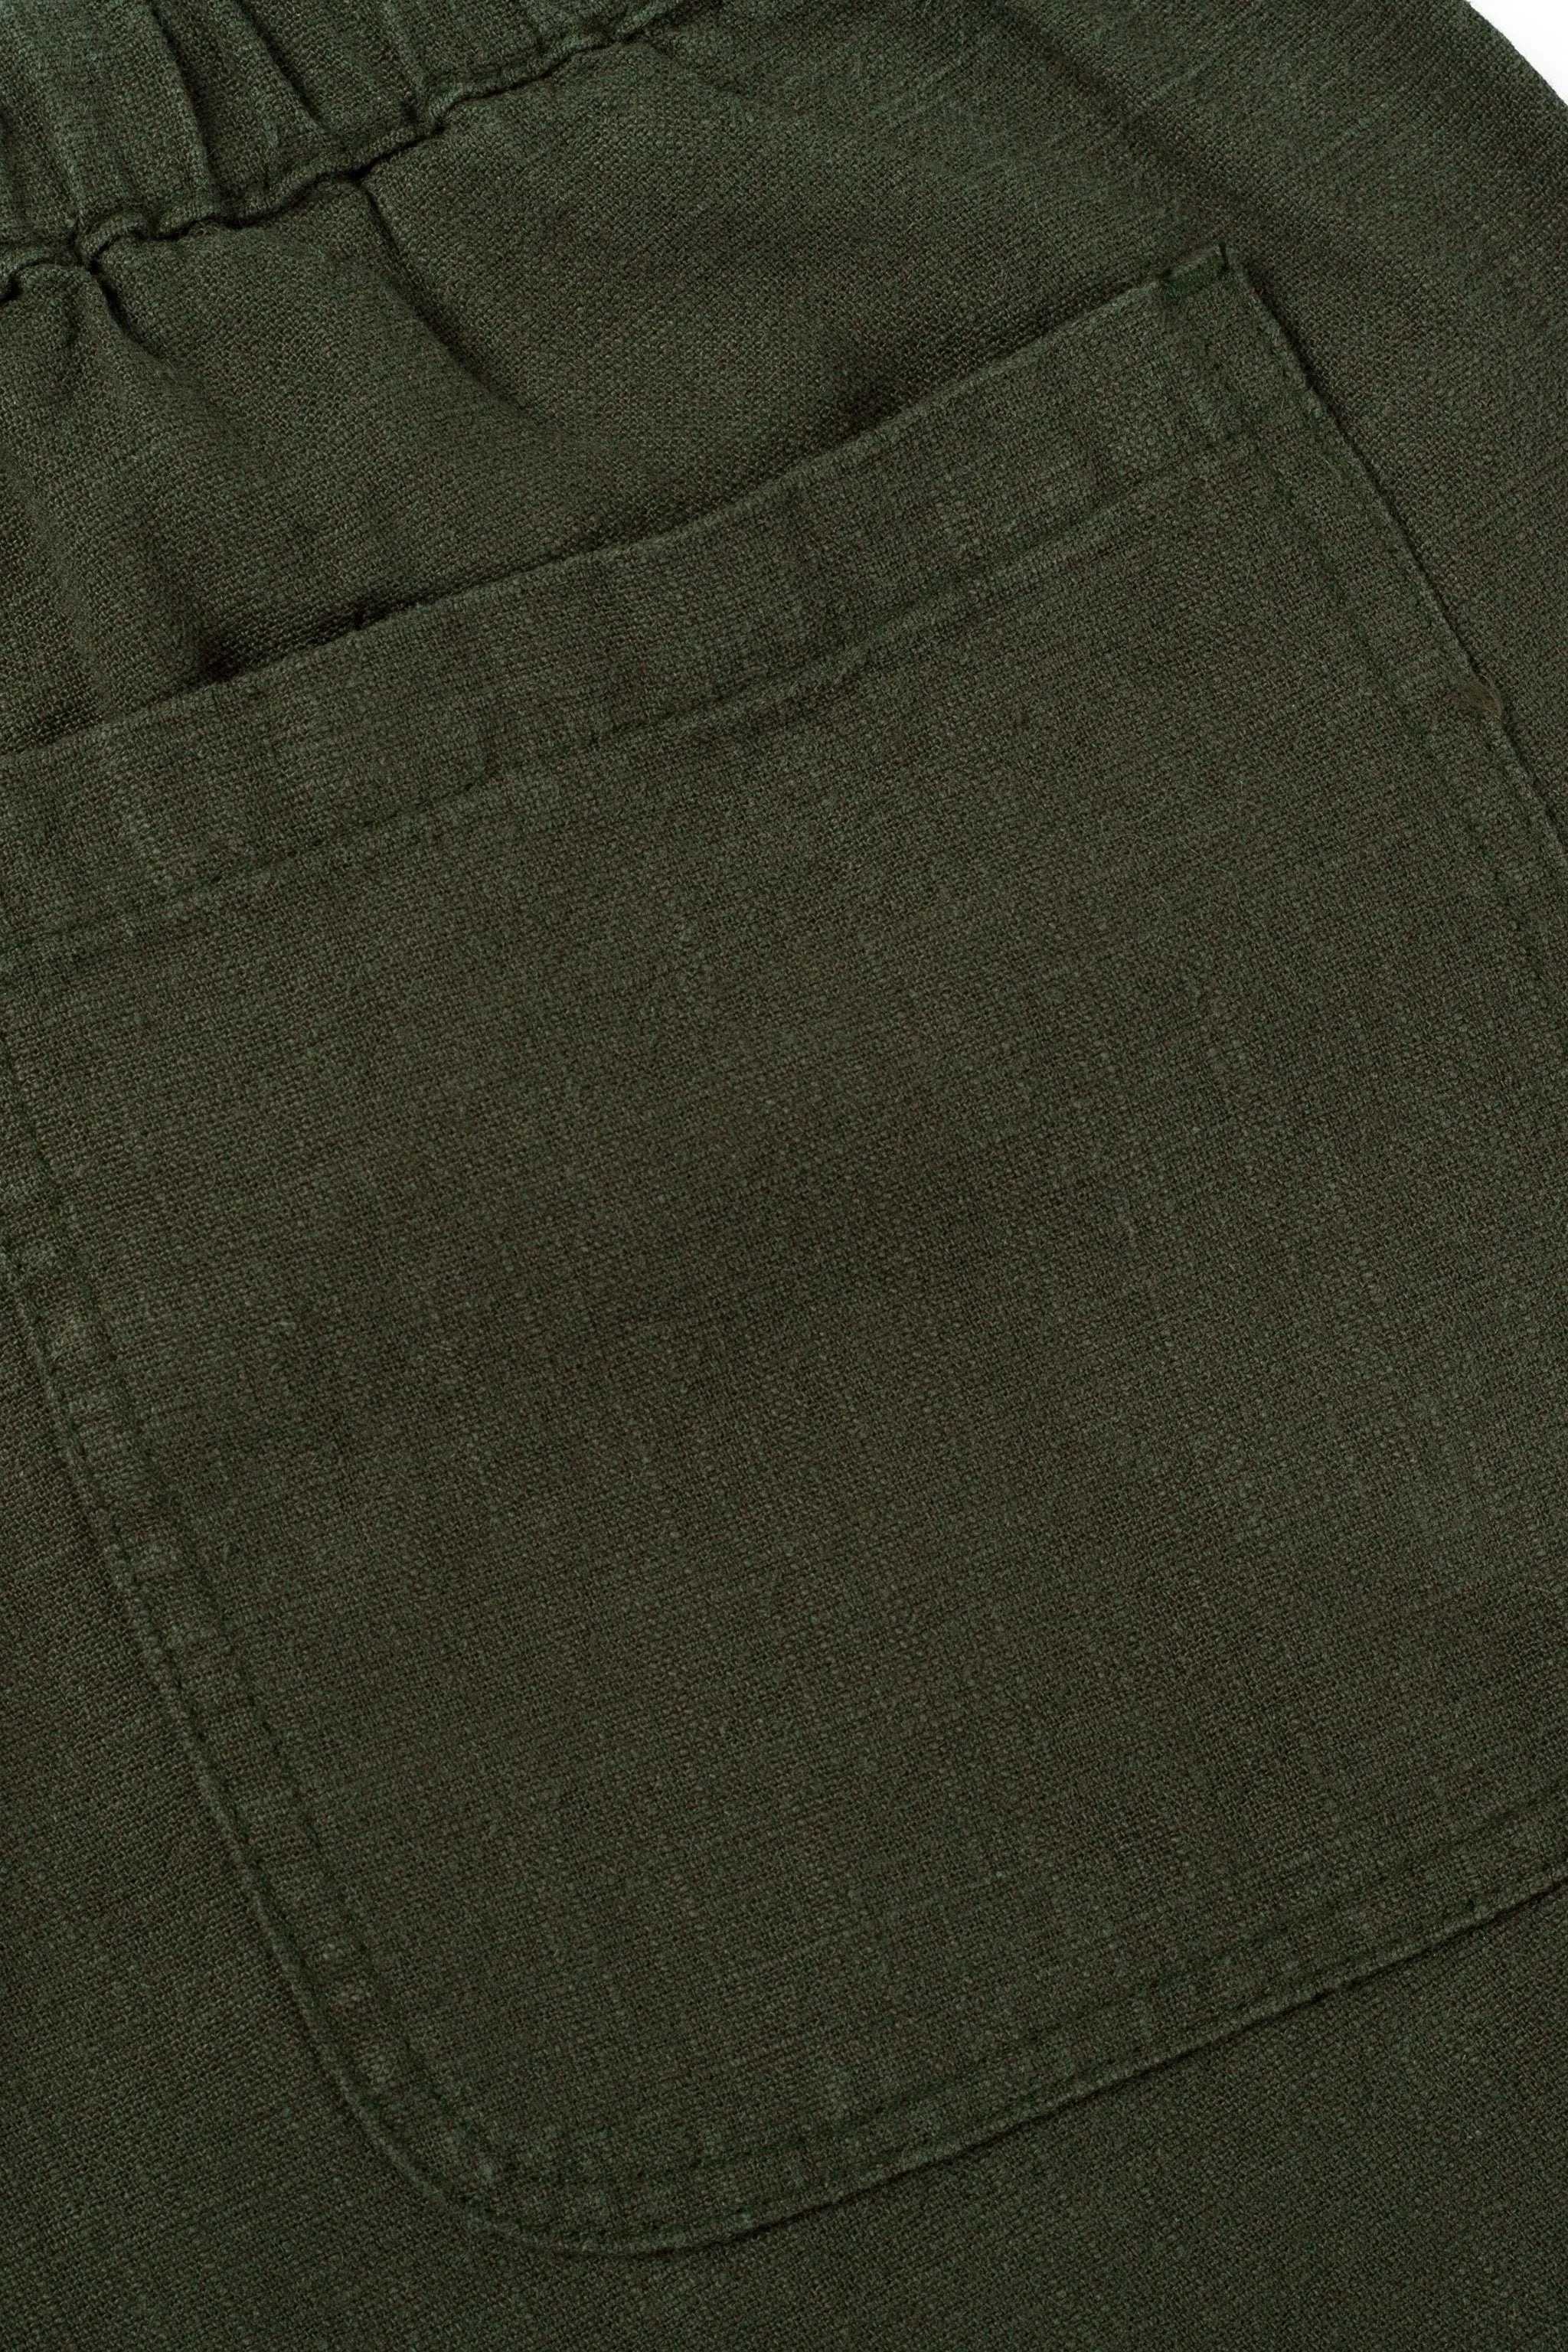 a close up of a pair of green pants